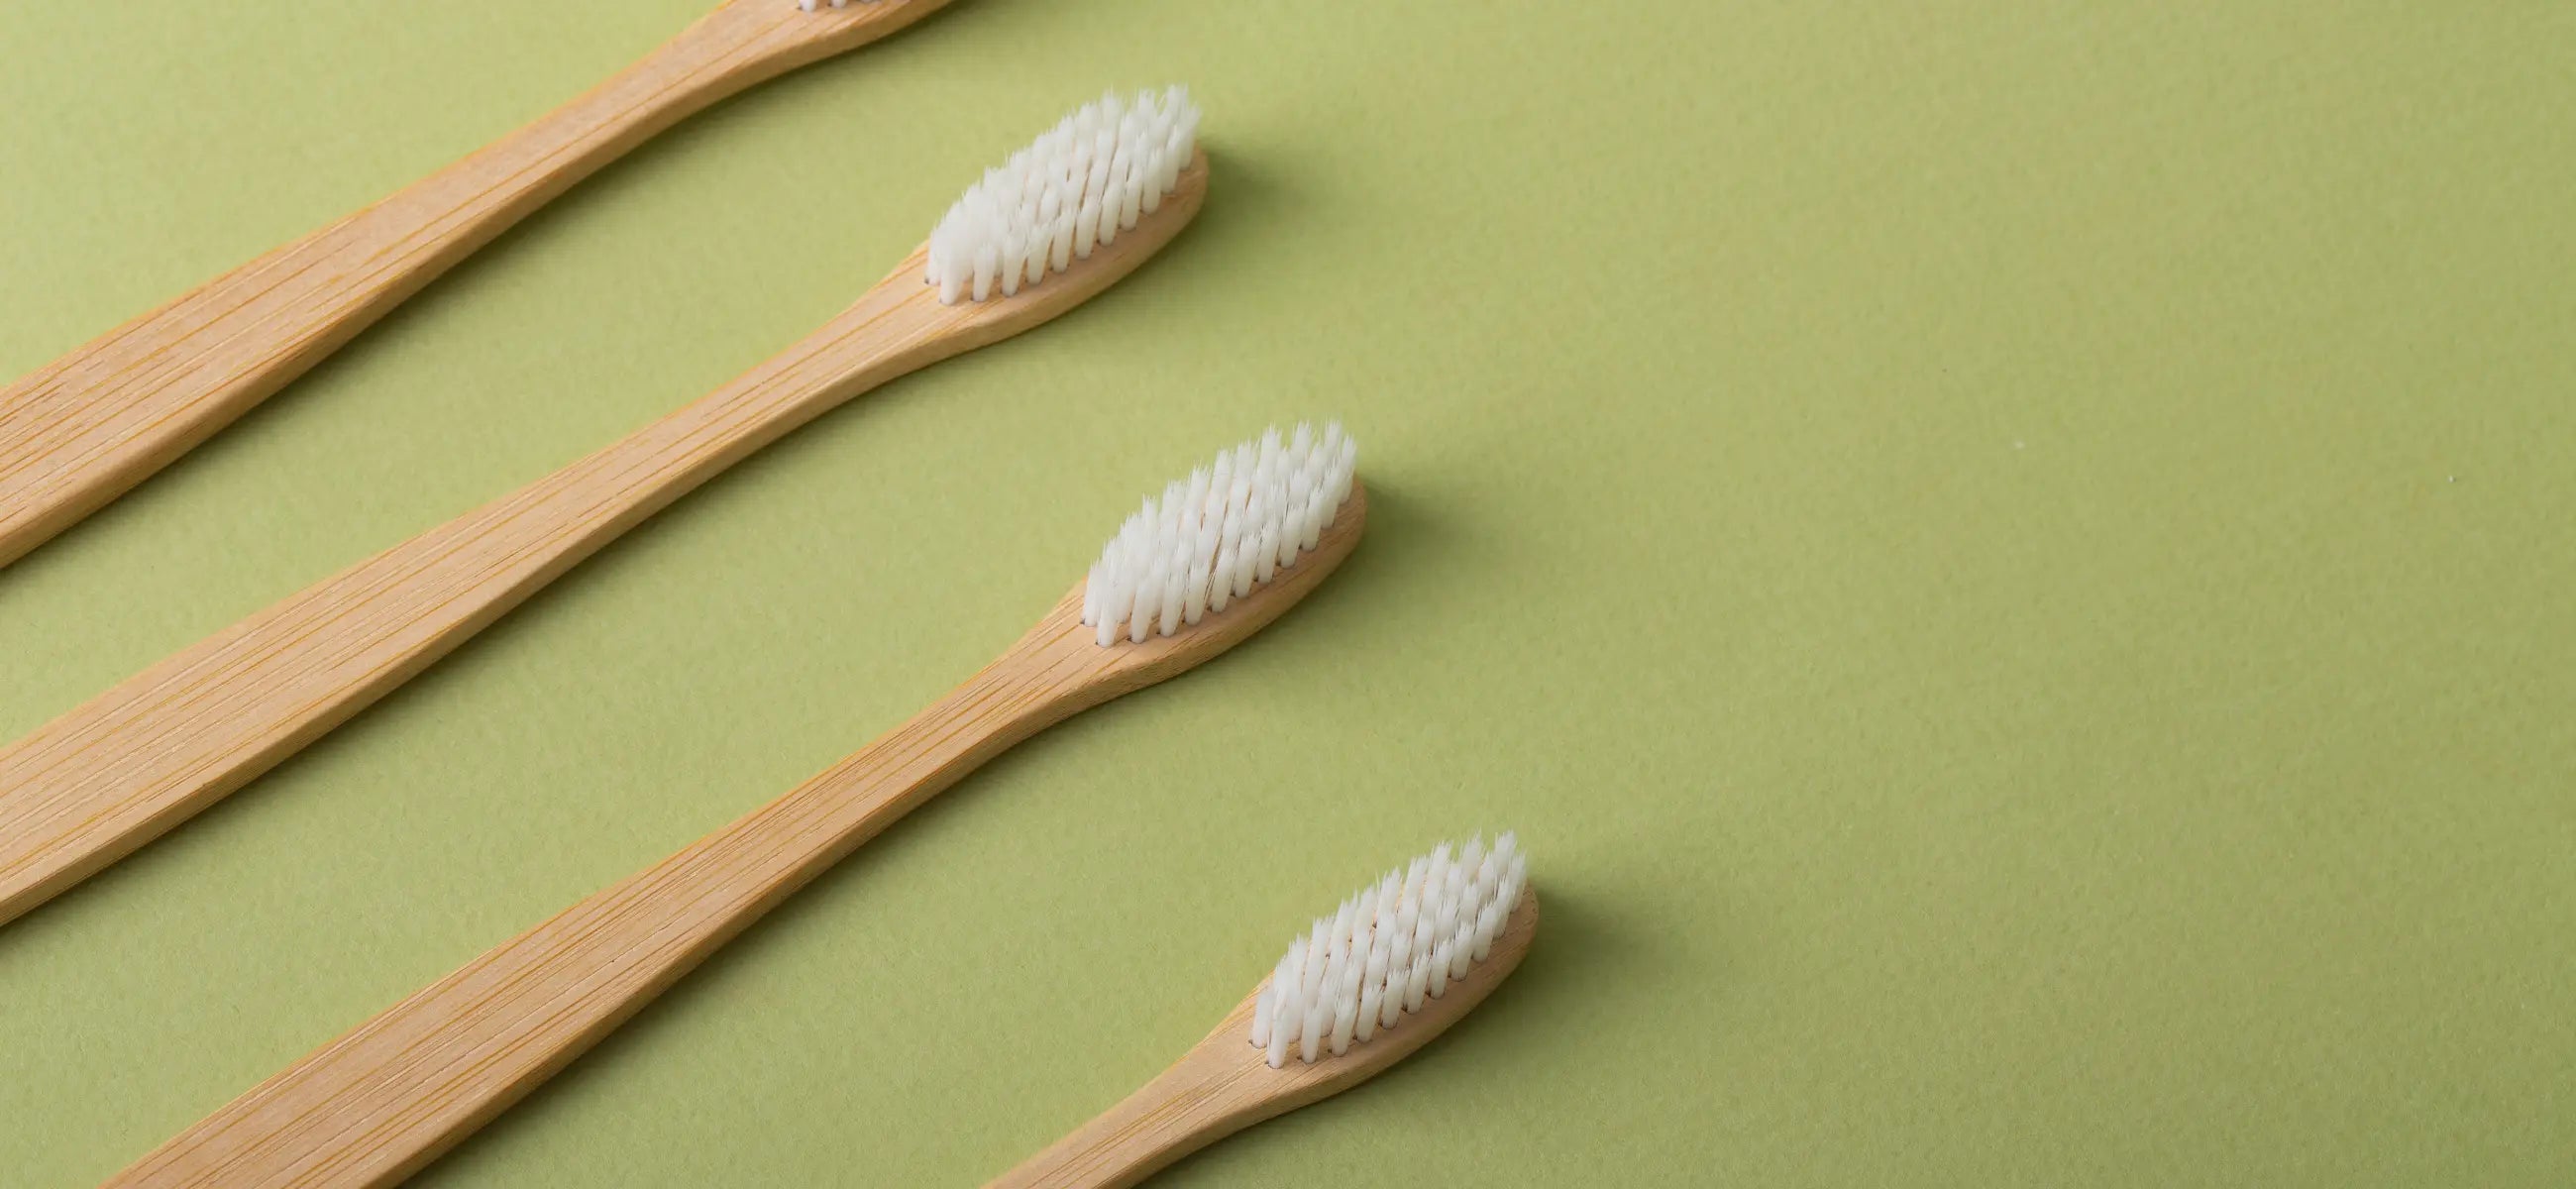 Soft & supple - are soft toothbrushes good for dental hygiene?